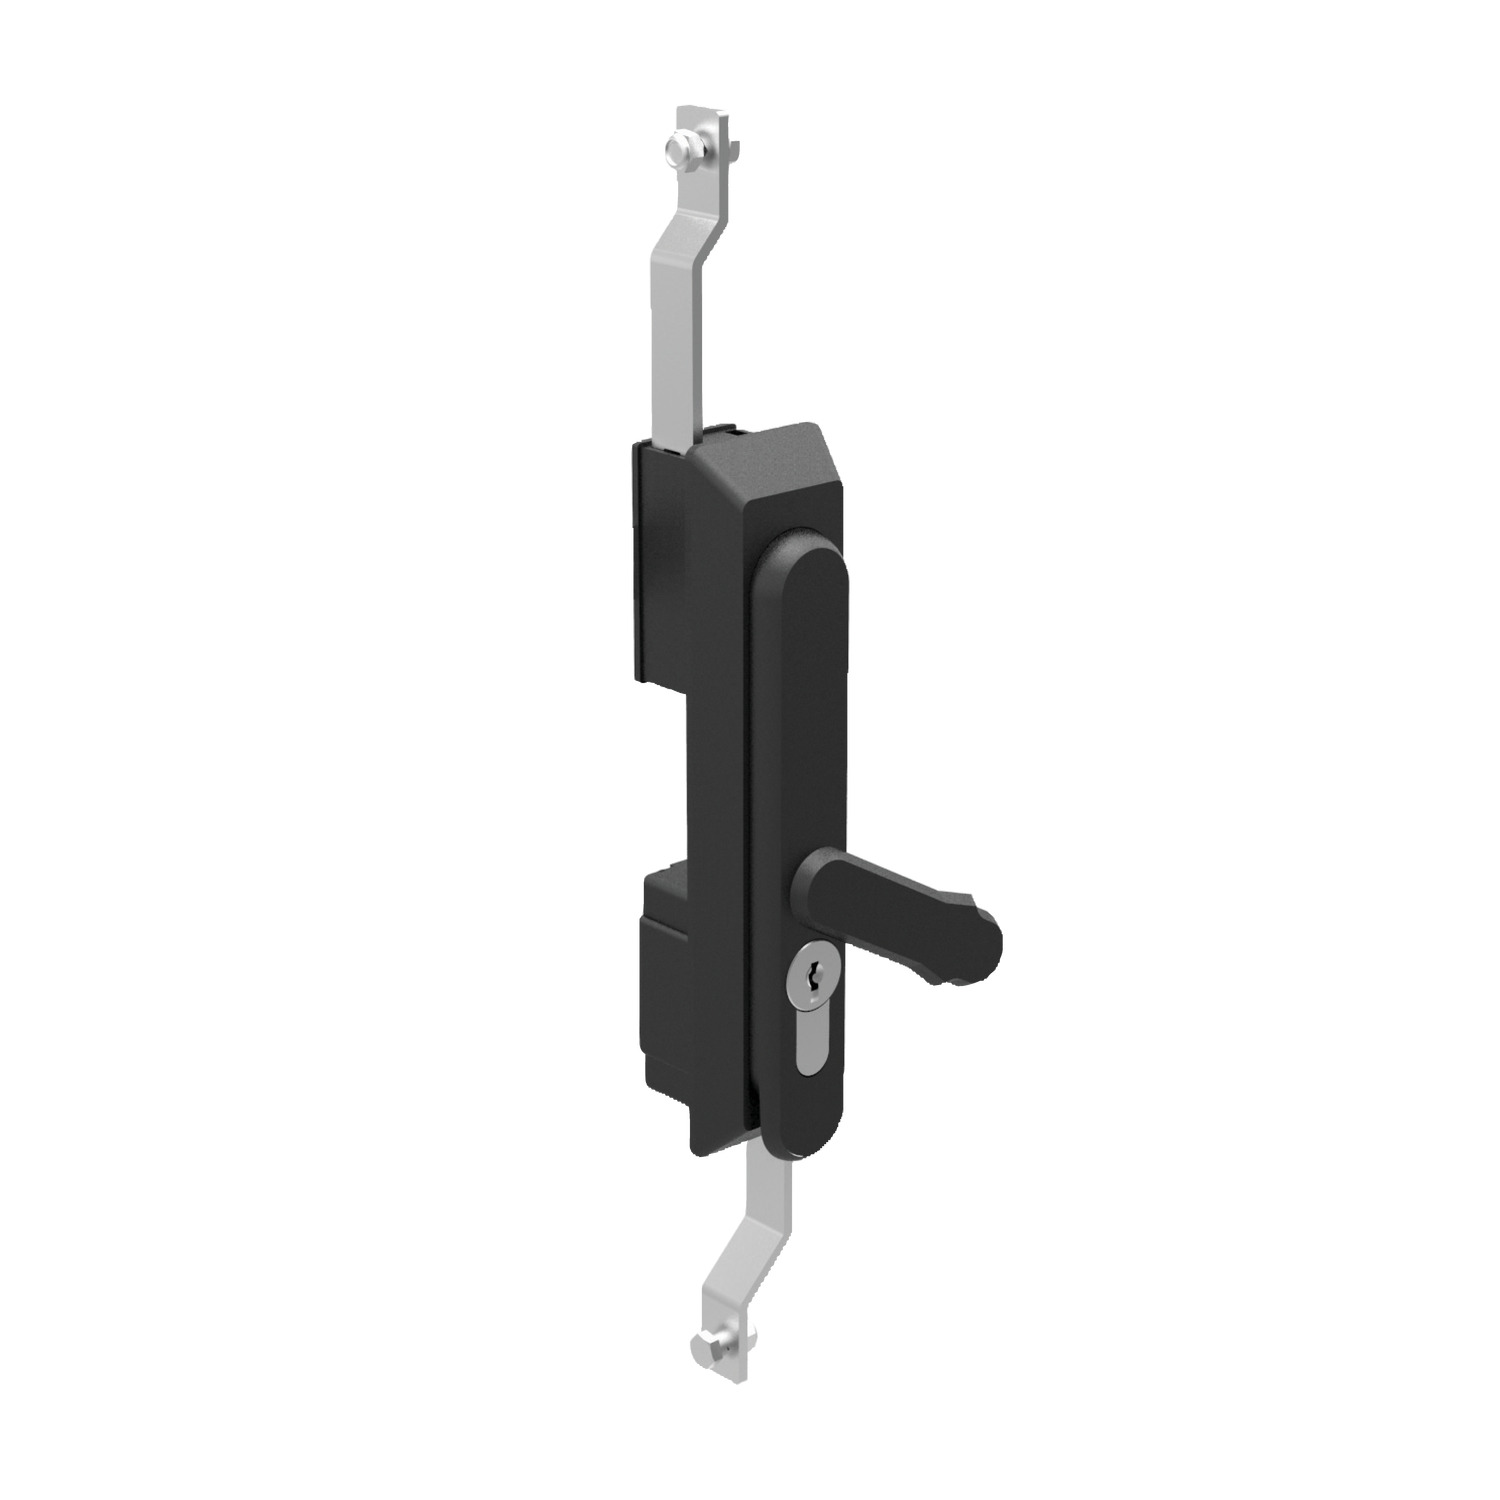 B2091 - Swing Handles - with Rod Control